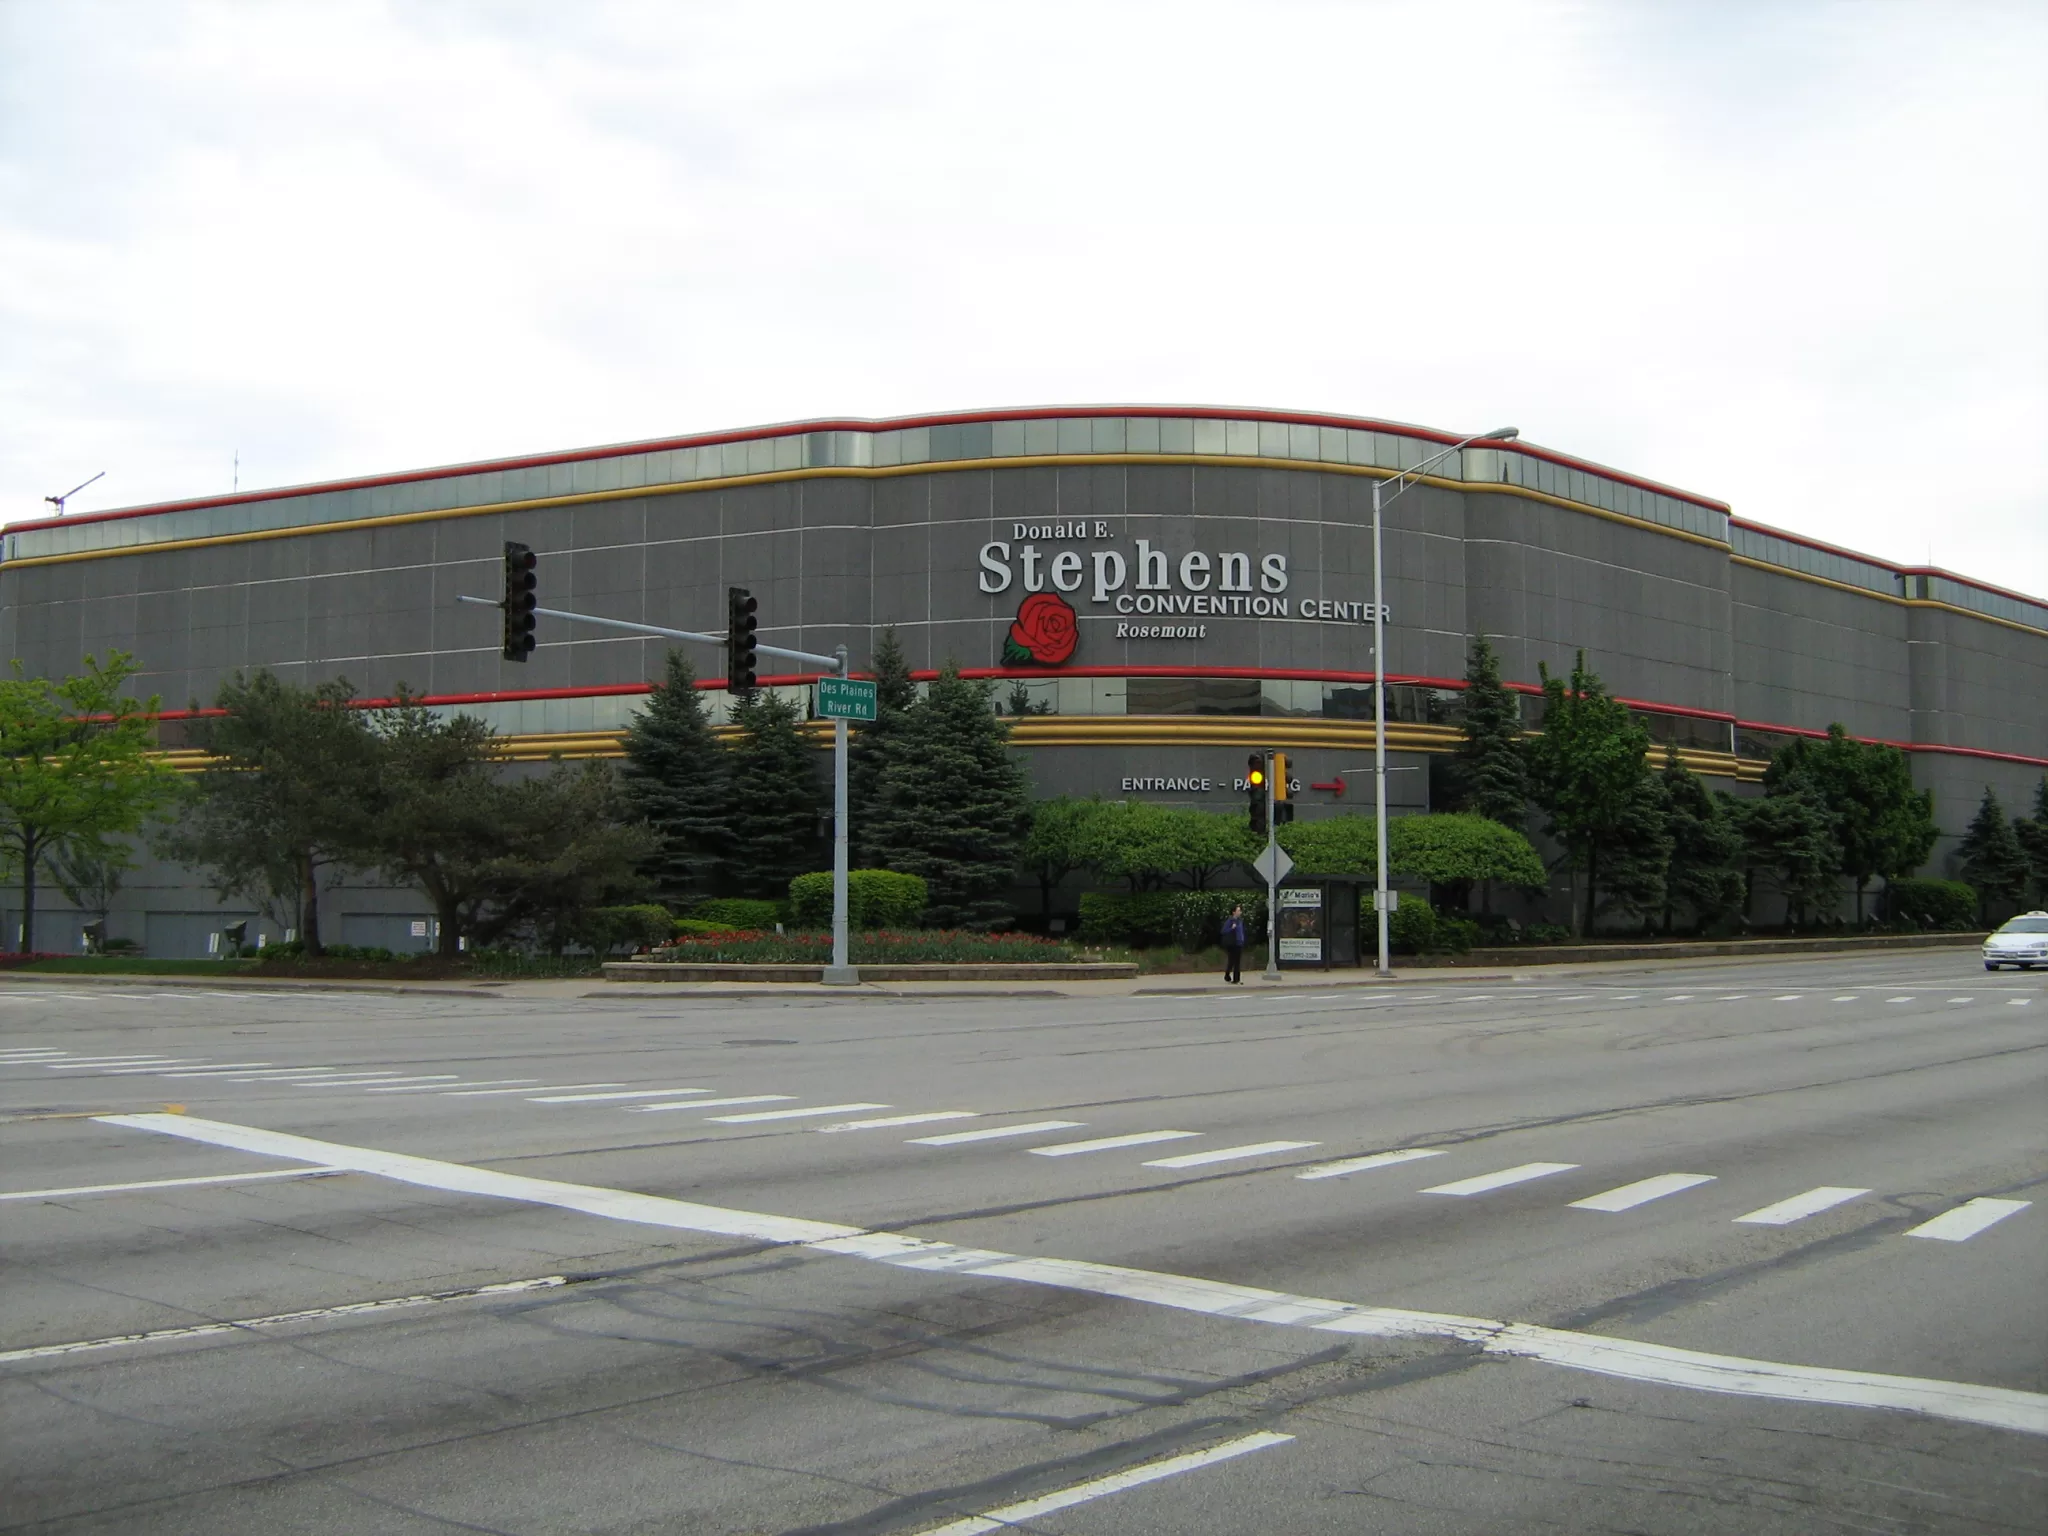 Donald E. Stephens Convention Center located in Rosemont